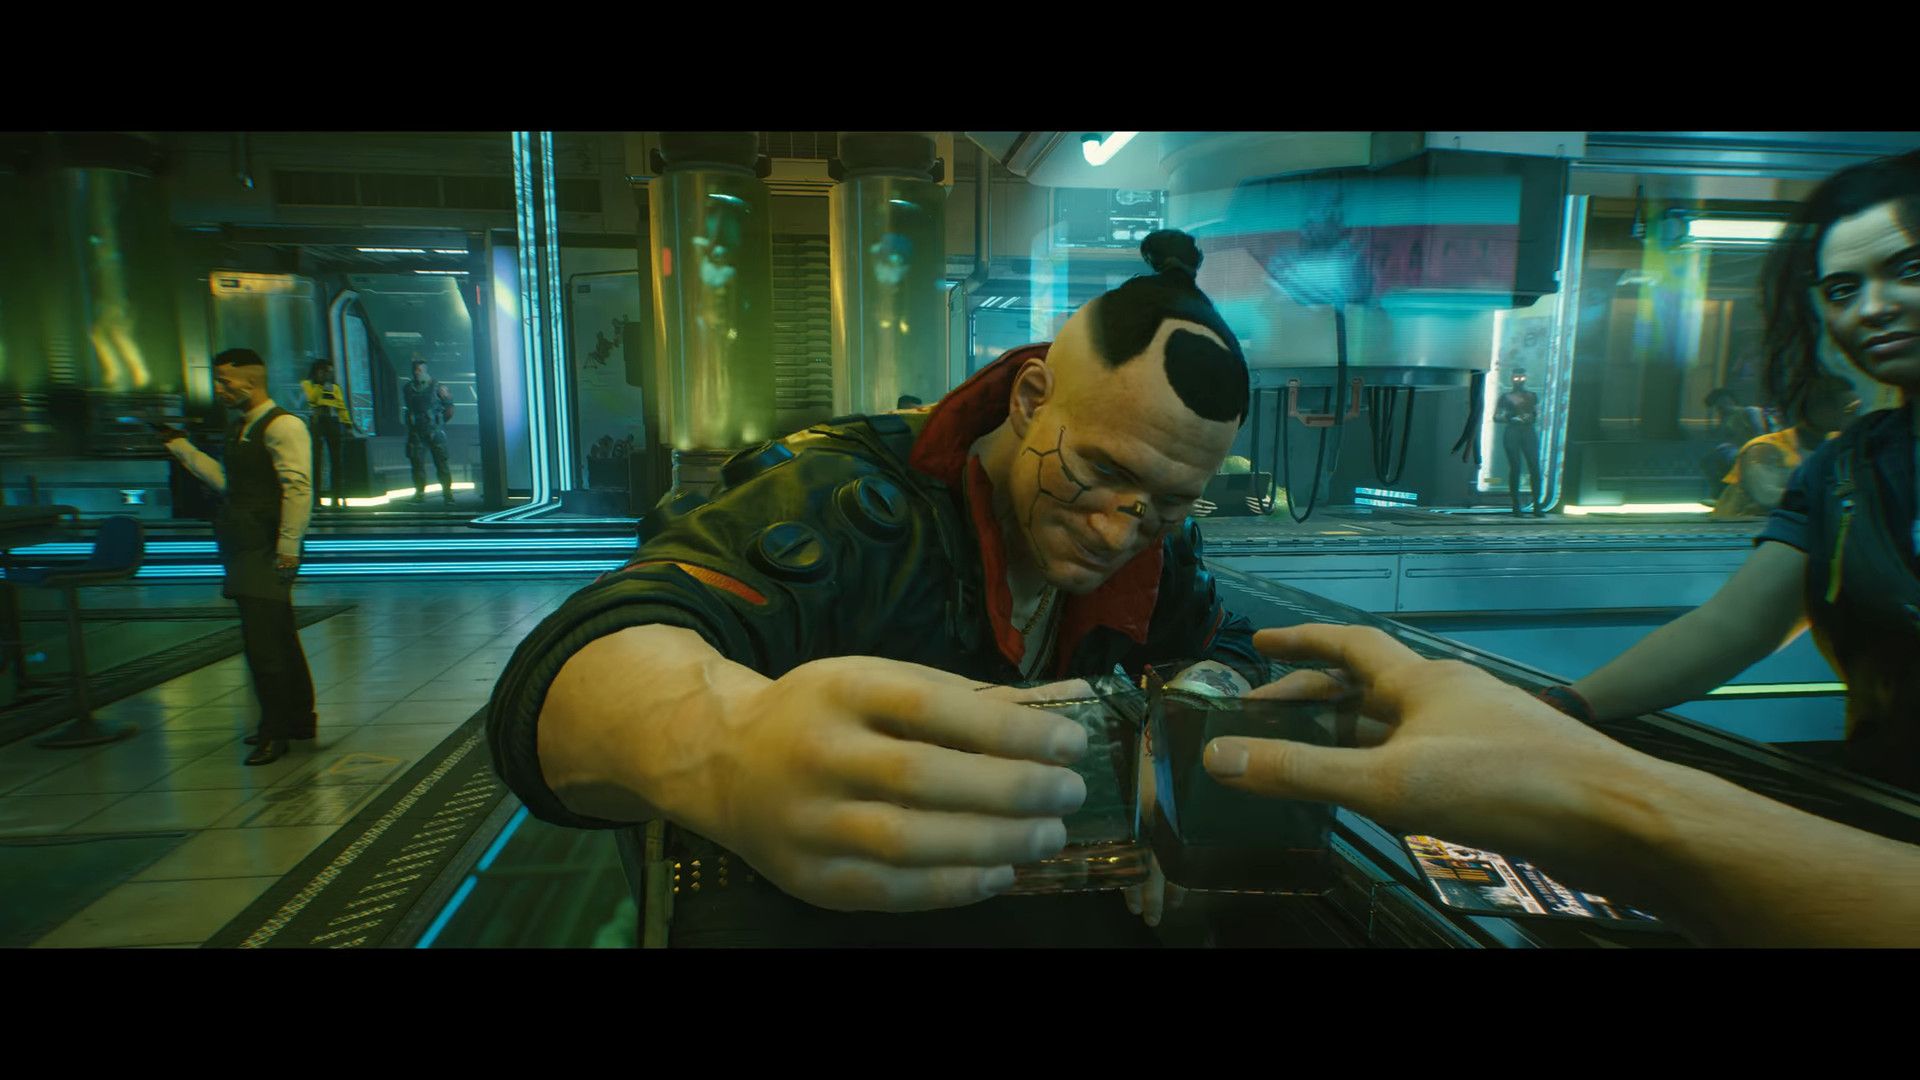 The Gig' Cyberpunk 2077 trailer highlights the first three missions